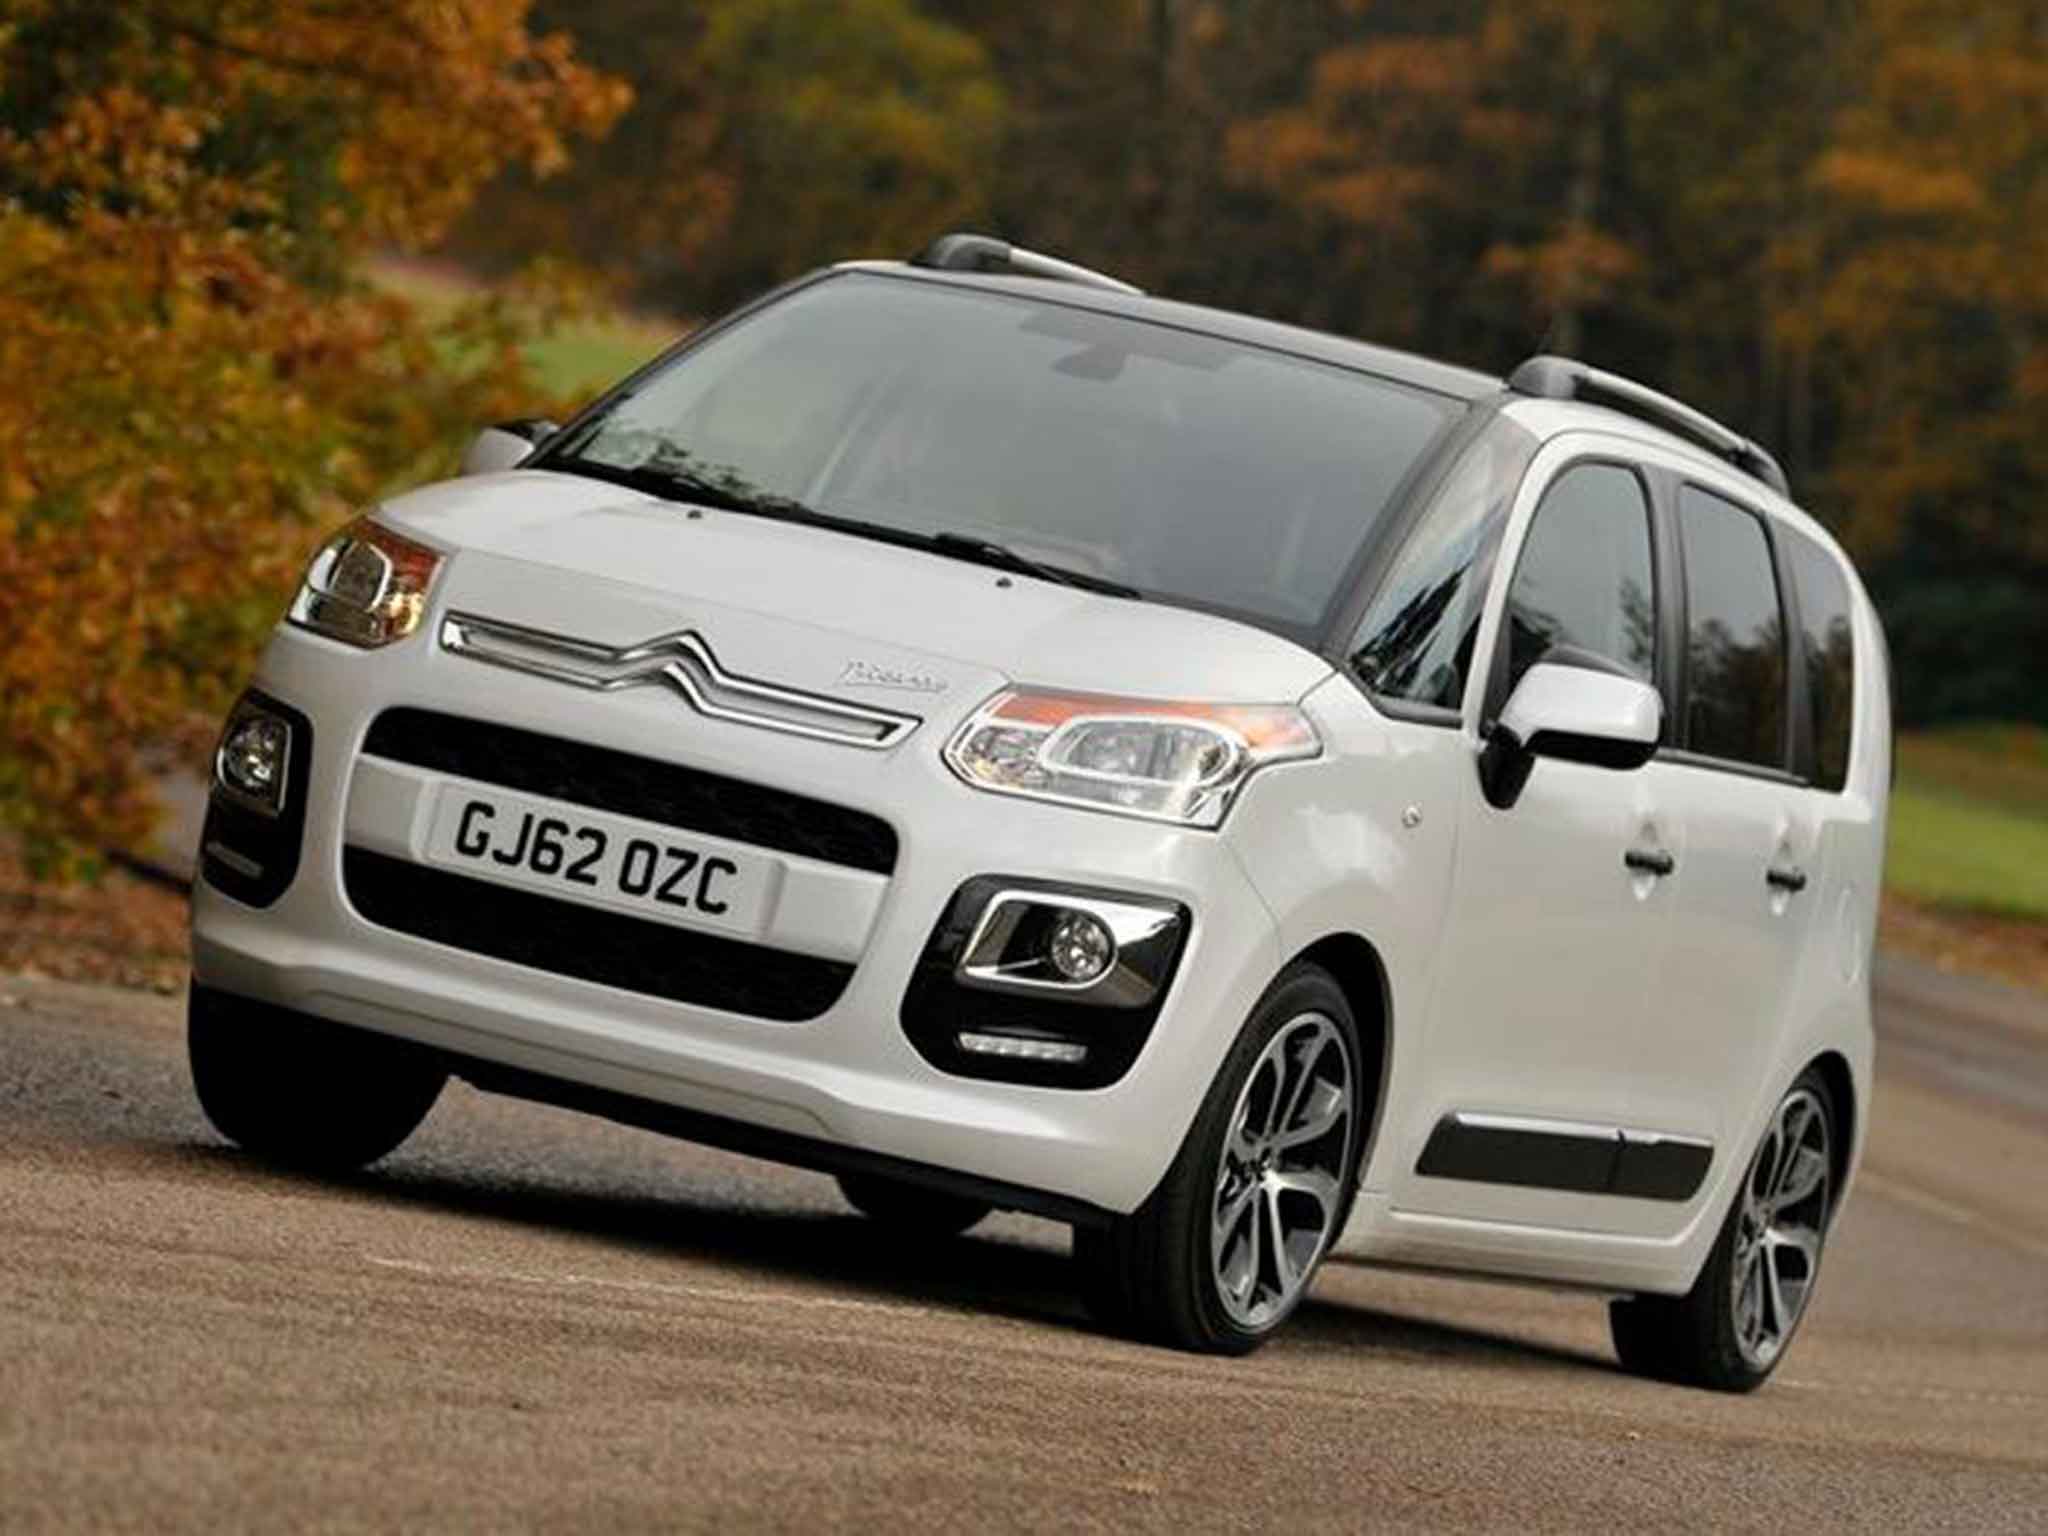 The Citroën C3 Picasso is light and airy inside with masses of space for people and cargo